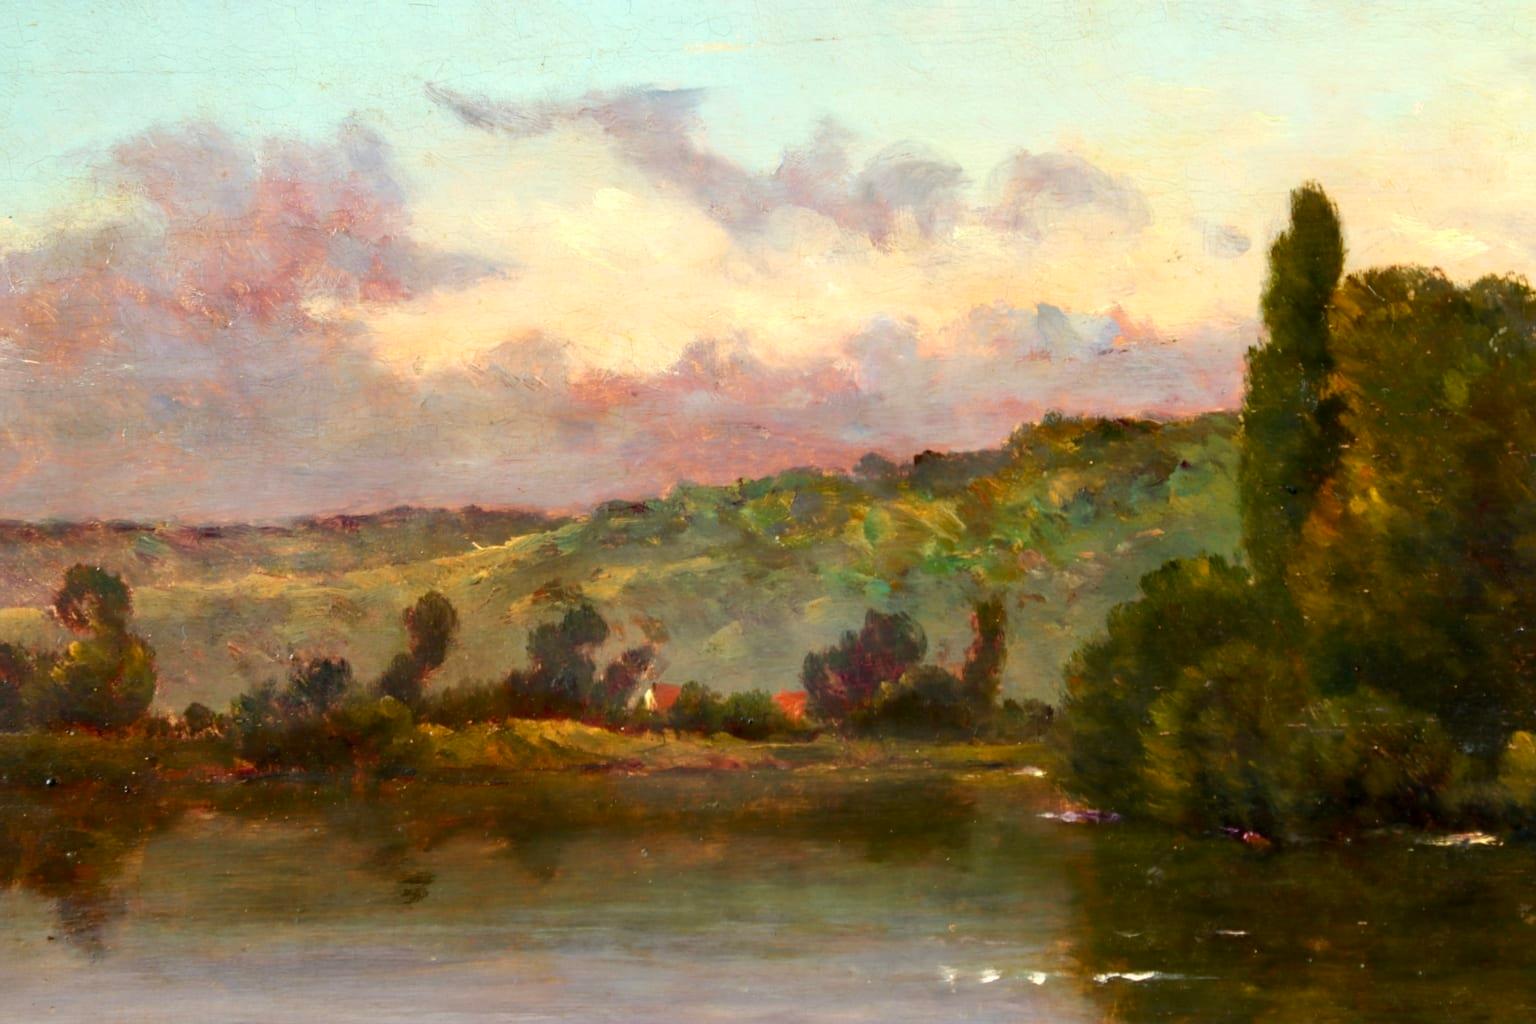 A charming oil on panel circa 1880 by sought after French Barbizon painter Hippolyte Camille Delpy. The piece depicts a view of the banks of the River Seine, with lush green trees and clouds illuminated in pinks and yellows contrasting against the